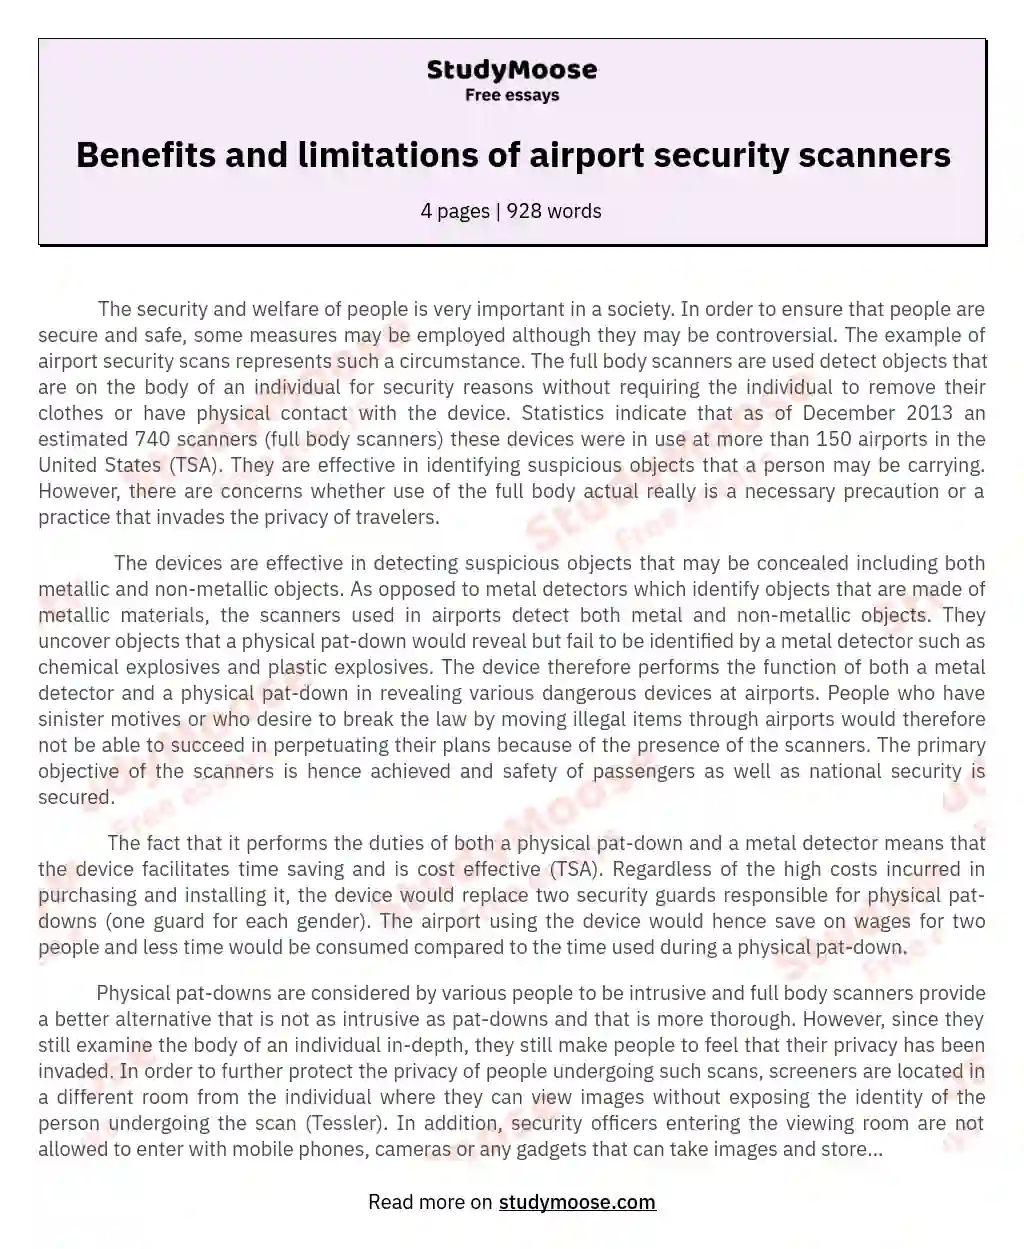 Benefits and limitations of airport security scanners essay